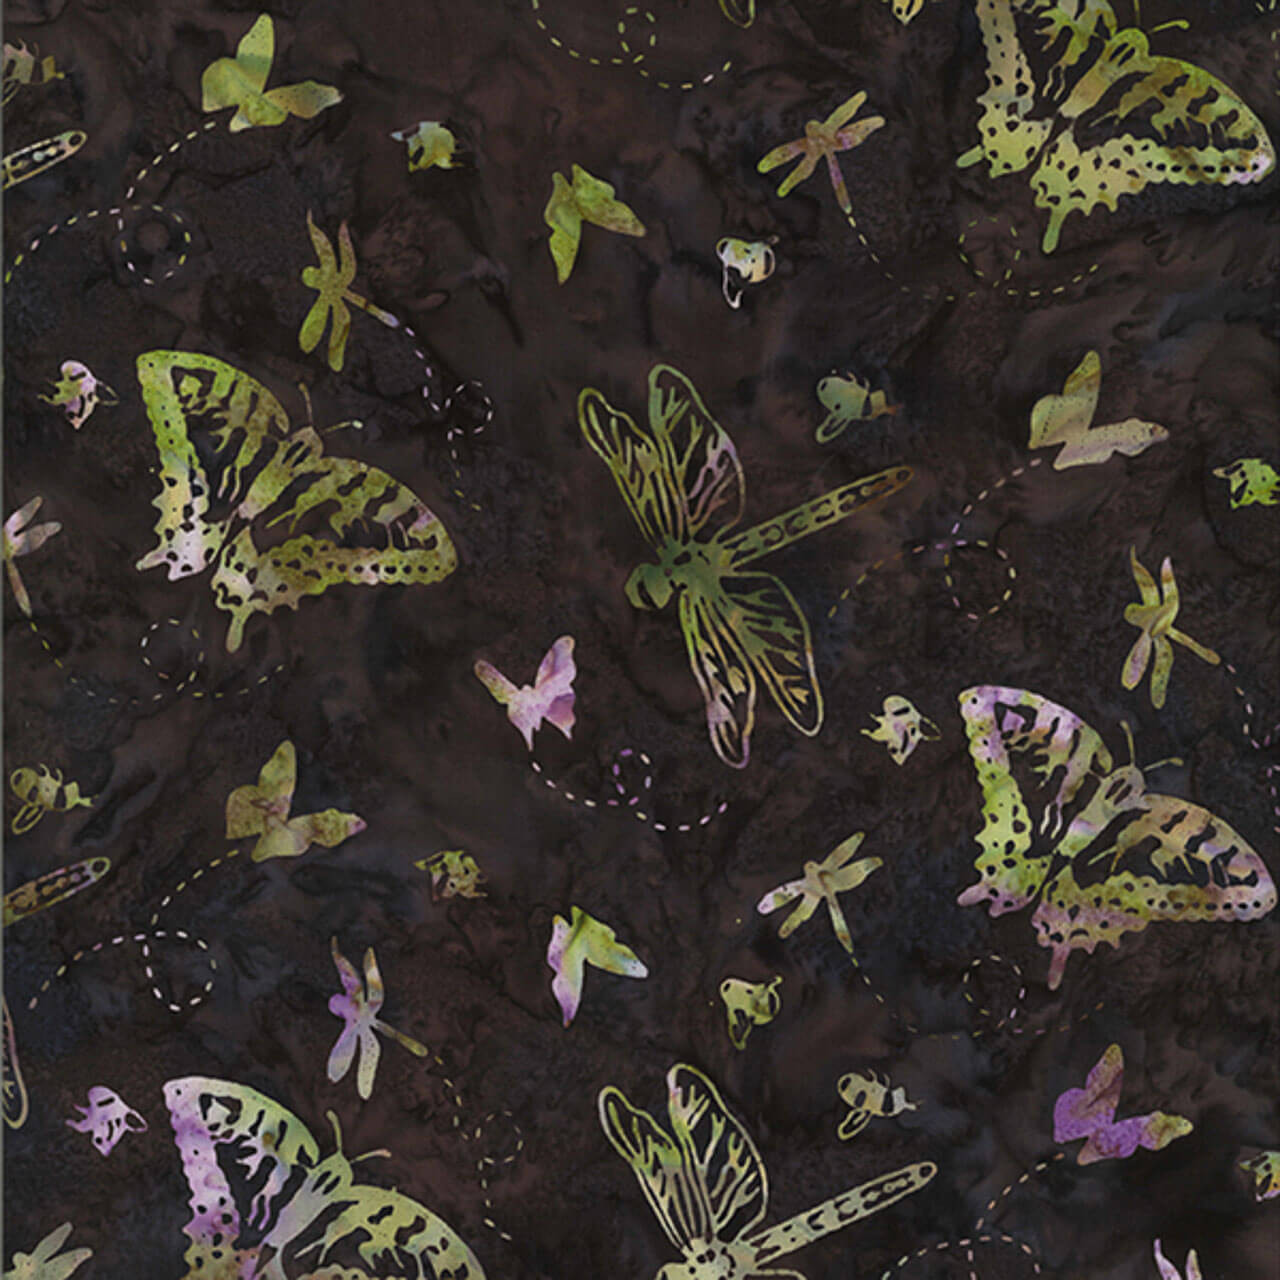 100% cotton batik fabric named Fluttering Dusk, featuring dragonflies and butterflies in vibrant hues on a black background, from Hoffman Fabrics' Bali Handpaints Batiks series.